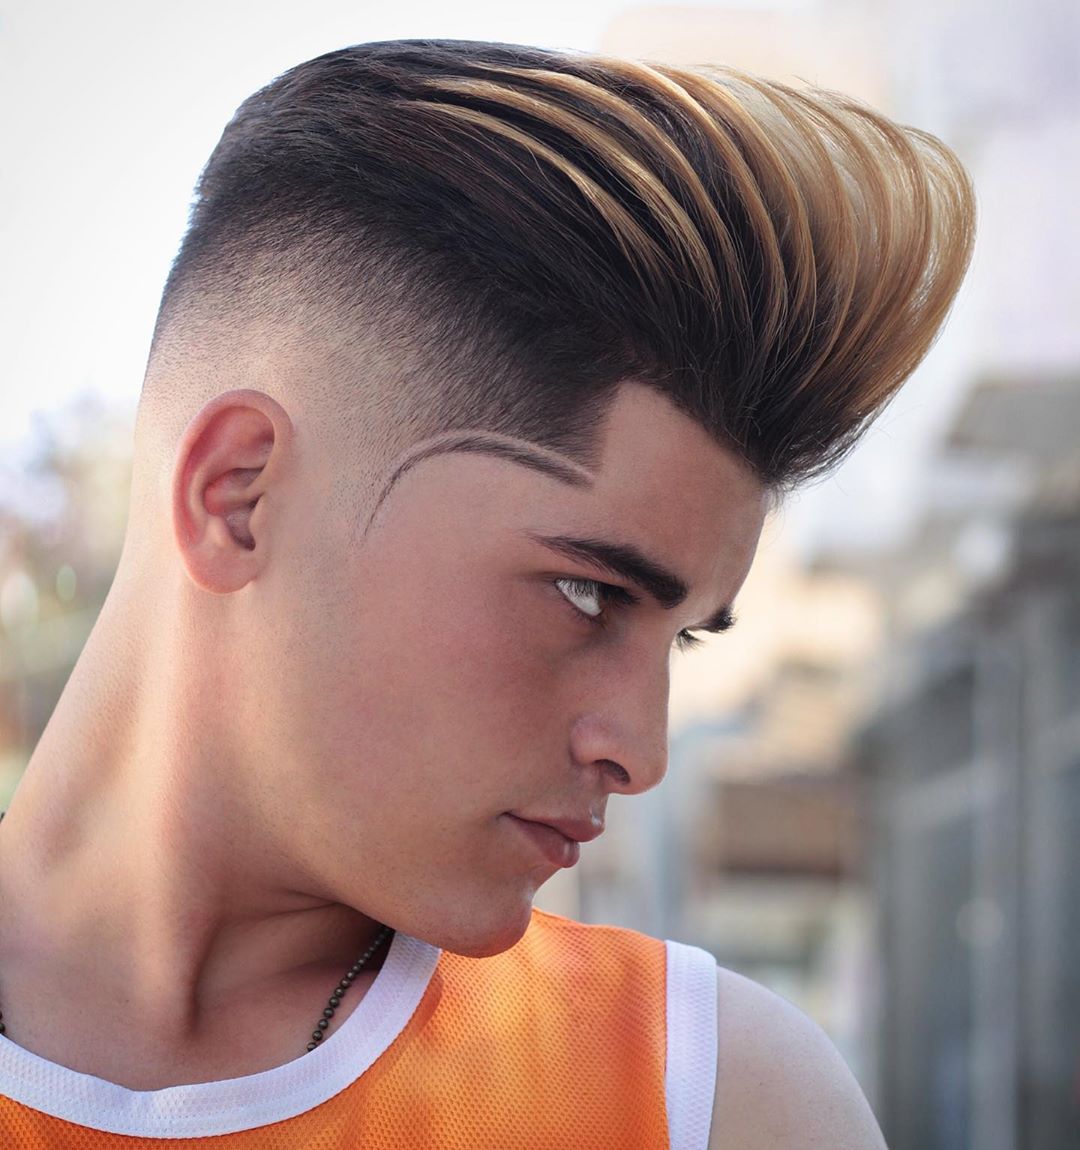 60 Most Creative Haircut Designs with Lines | Stylish ...